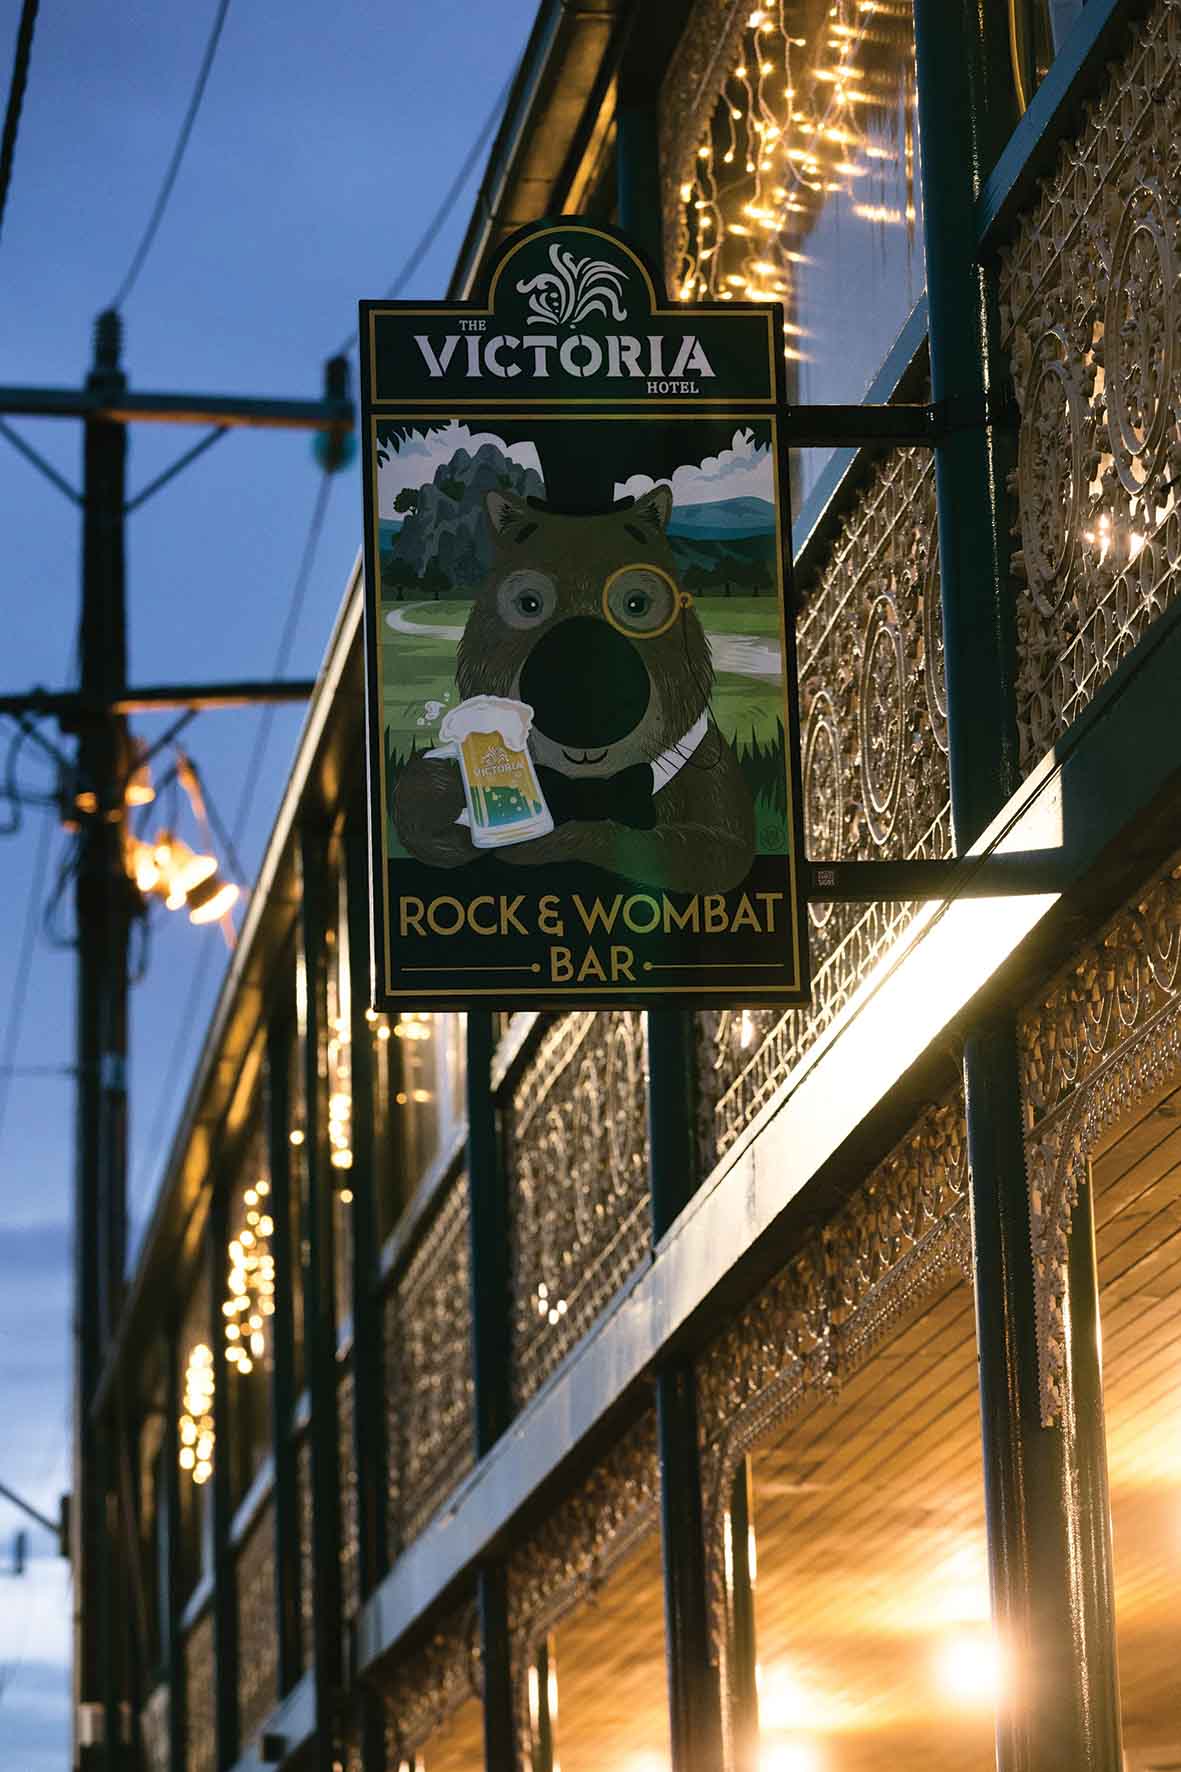 The Victoria Hotel, photo by Kim Selby